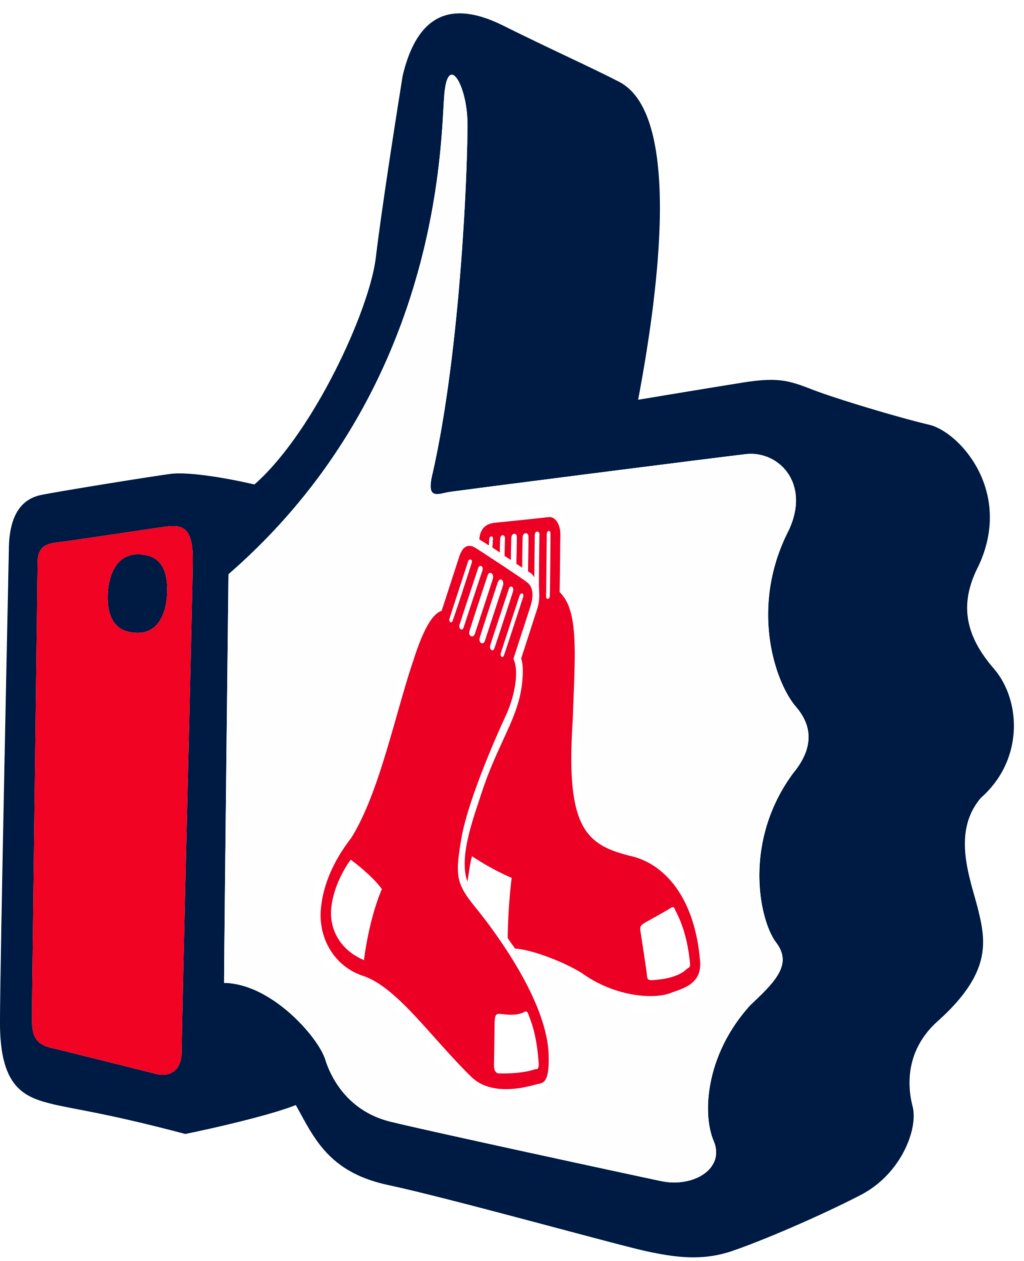 MLB Boston Red Sox SVG, SVG Files For Silhouette, Boston Red Sox Files For Cricut, Boston Red Sox SVG, DXF, EPS, PNG Instant Download. Boston Red Sox SVG, SVG Files For Silhouette, Boston Red Sox Files For Cricut, Boston Red Sox SVG, DXF, EPS, PNG Instant Download.